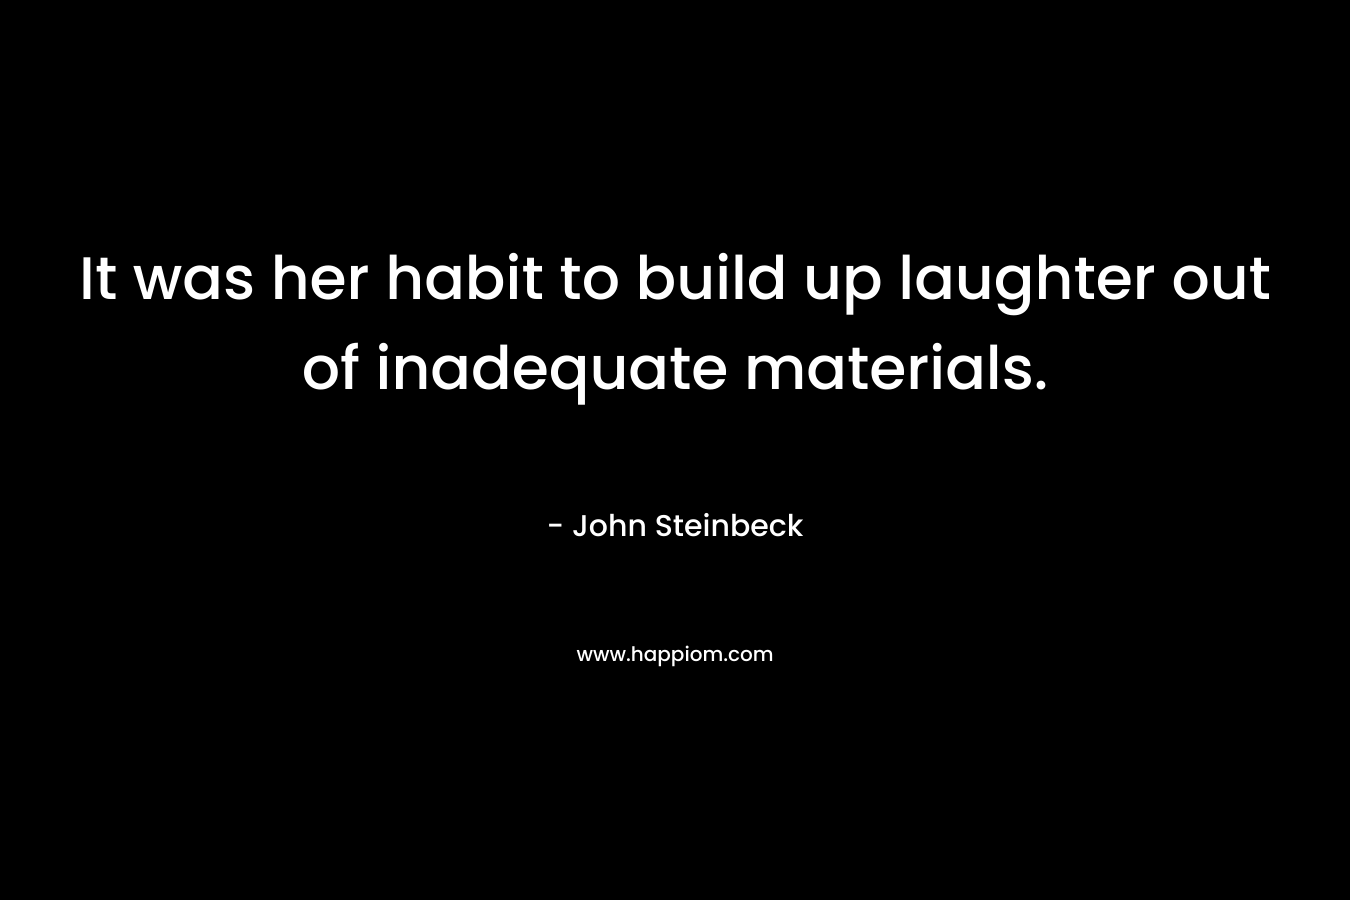 It was her habit to build up laughter out of inadequate materials.